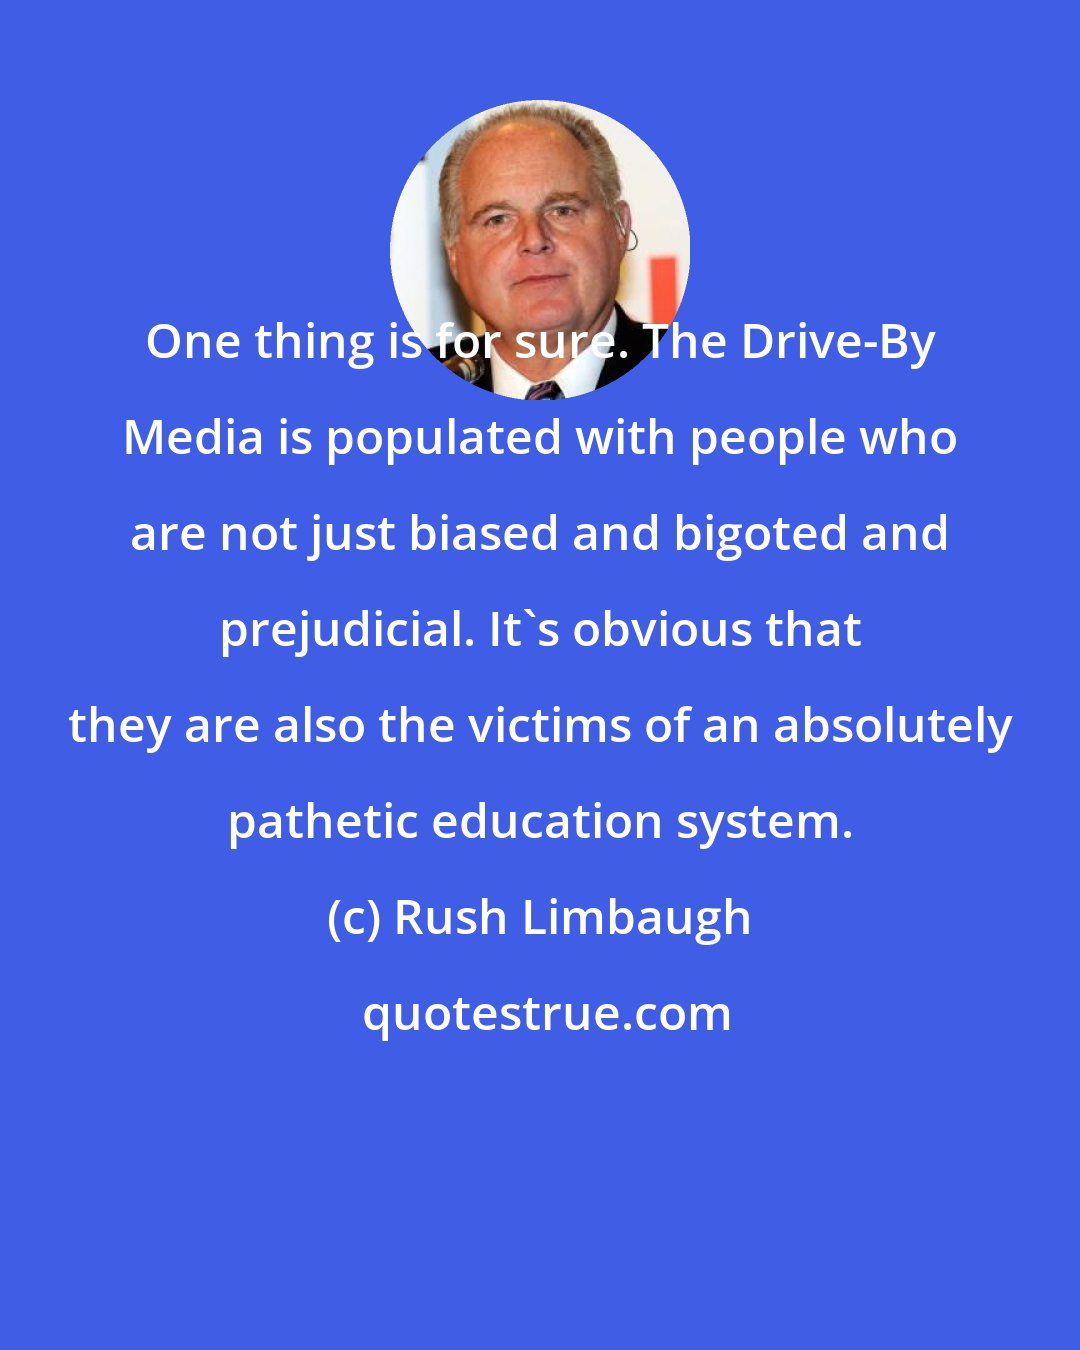 Rush Limbaugh: One thing is for sure. The Drive-By Media is populated with people who are not just biased and bigoted and prejudicial. It's obvious that they are also the victims of an absolutely pathetic education system.